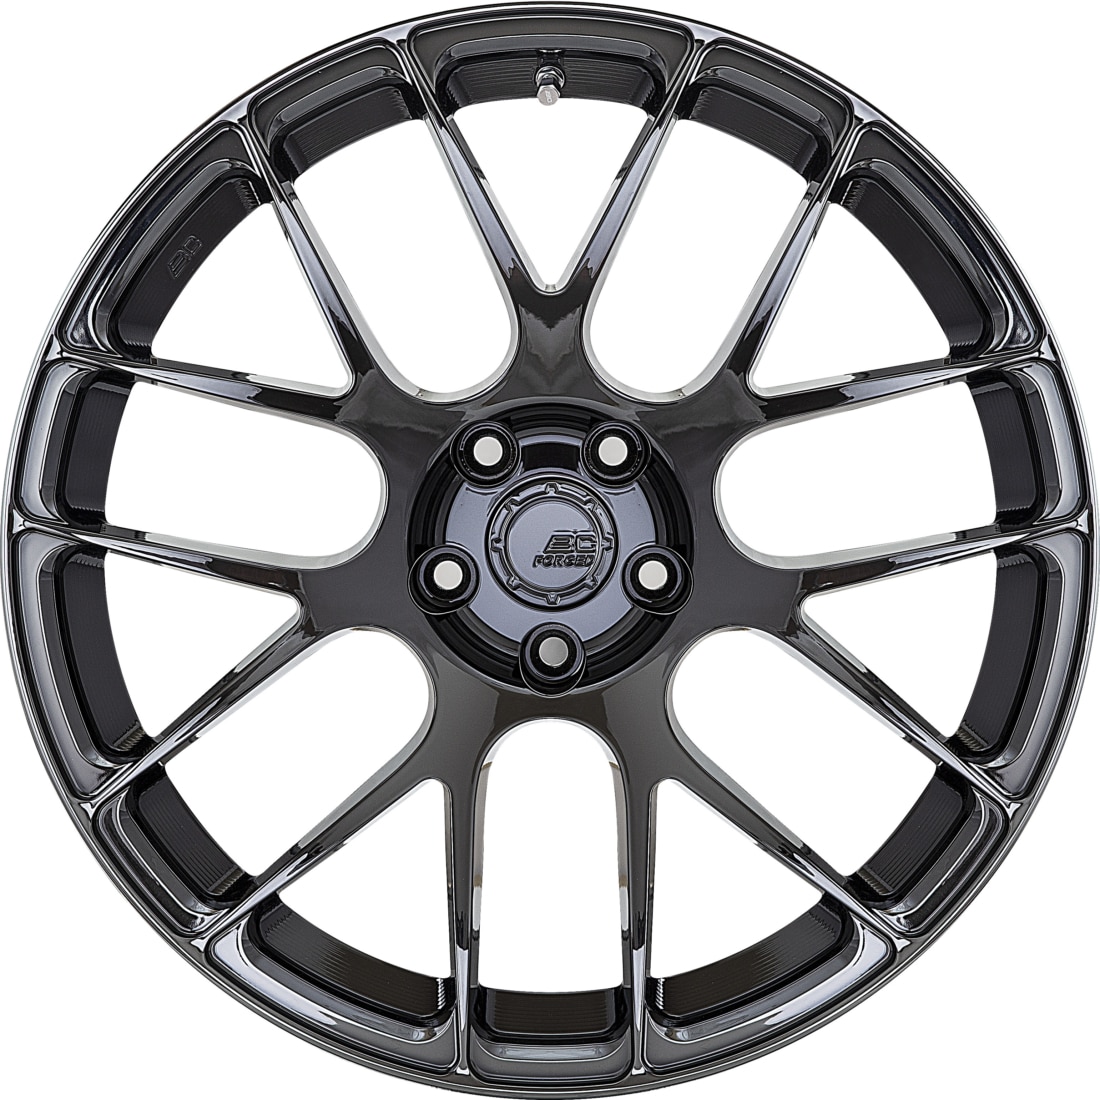 2020-23 BC Forged RS40 Wheels for C8 Corvette, Set of 4